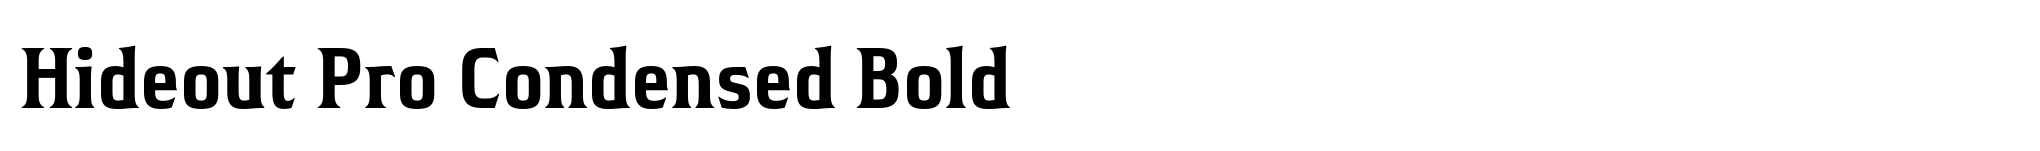 Hideout Pro Condensed Bold image